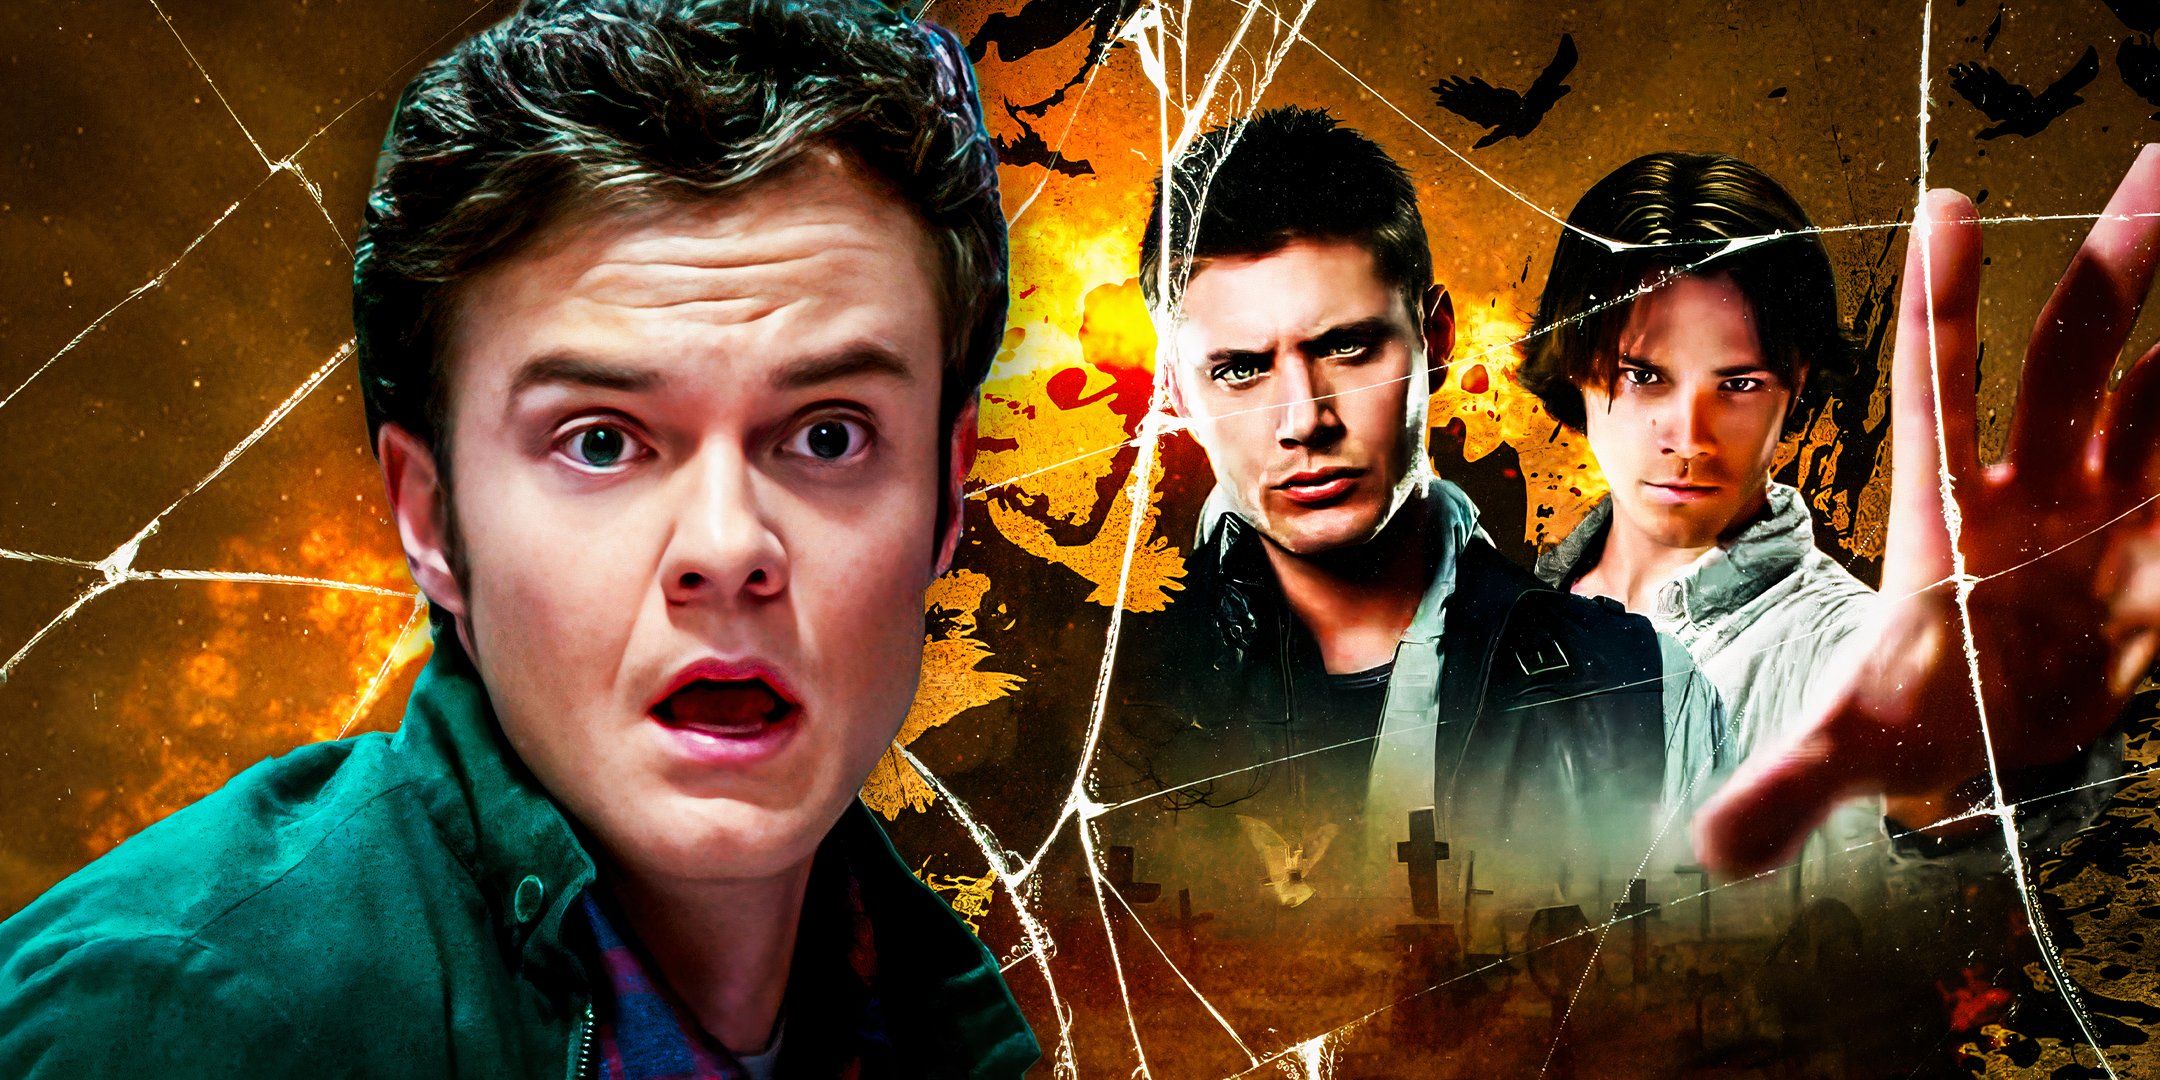 Jack Quaid as Hughie Campbell in The Boys alongside Jensen Ackles as Dean Winchester and Jared Padalecki as Sam Winchester in Supernatural